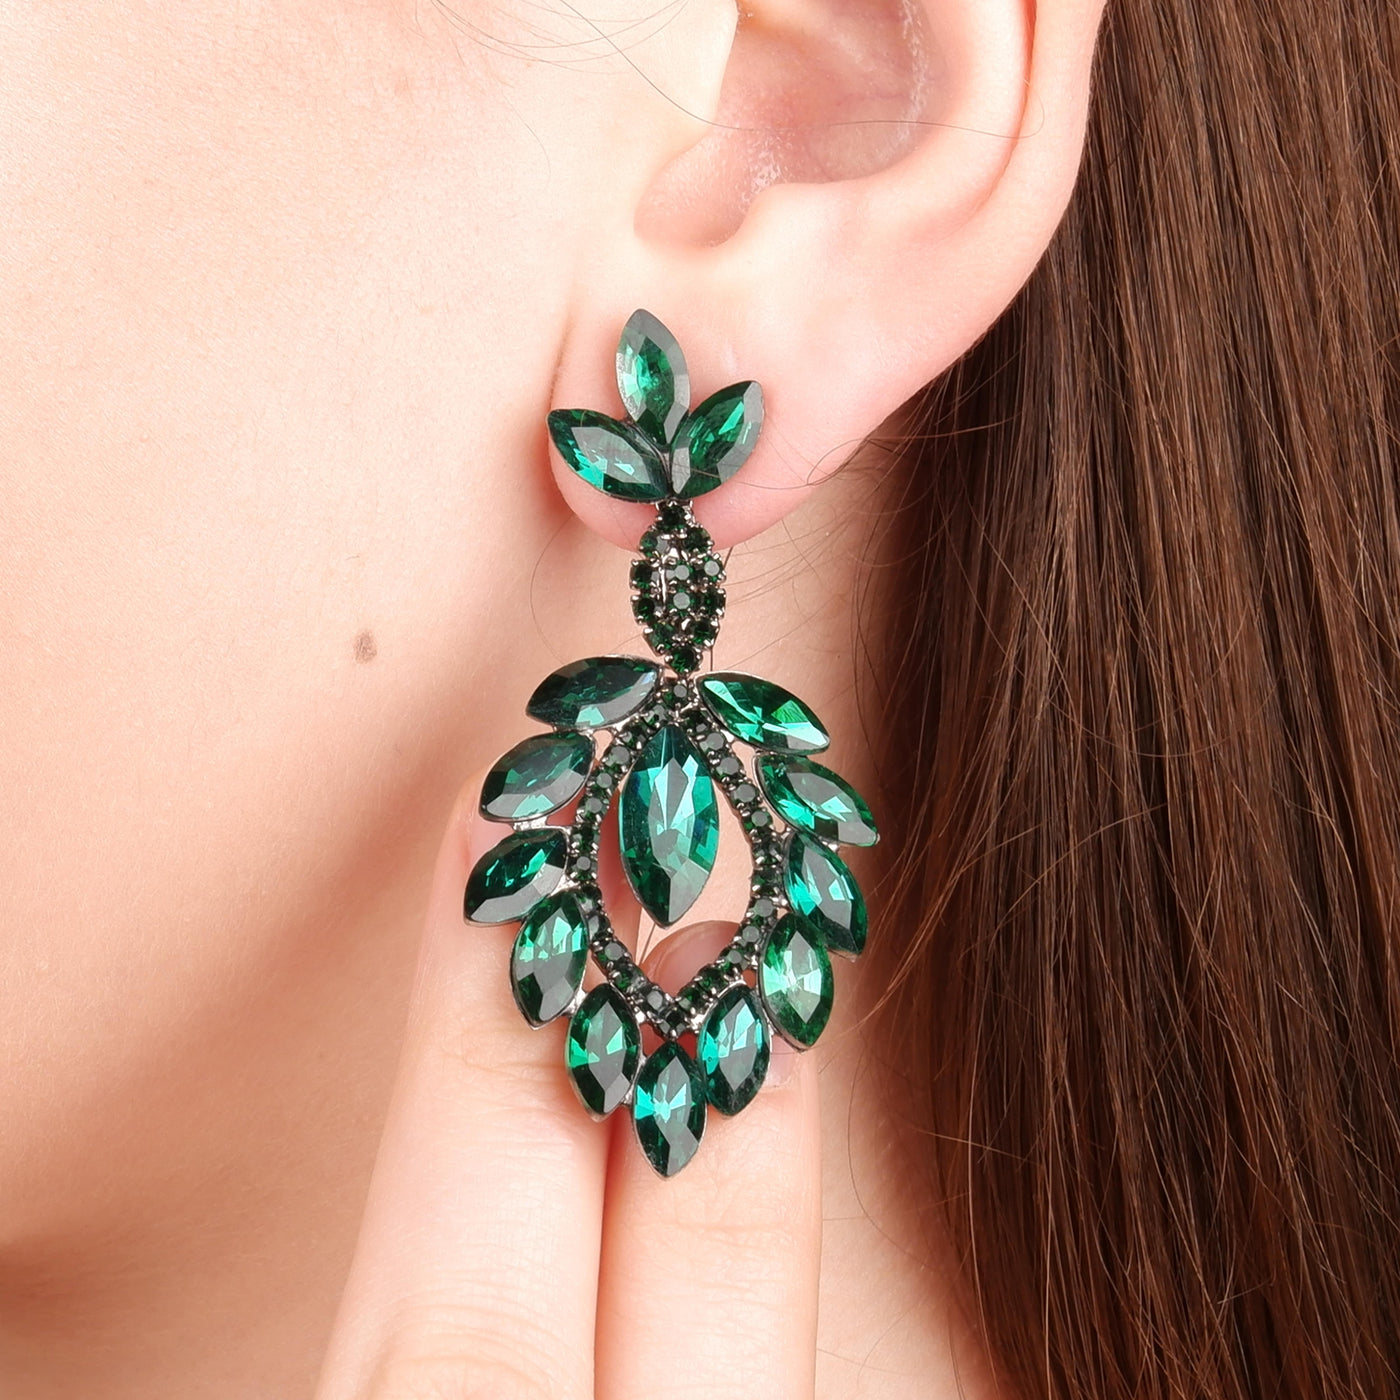 Special Design Crystal Stone Modern Bridal Earrings, Henna Night Earrings Specially Produced for Costume Night